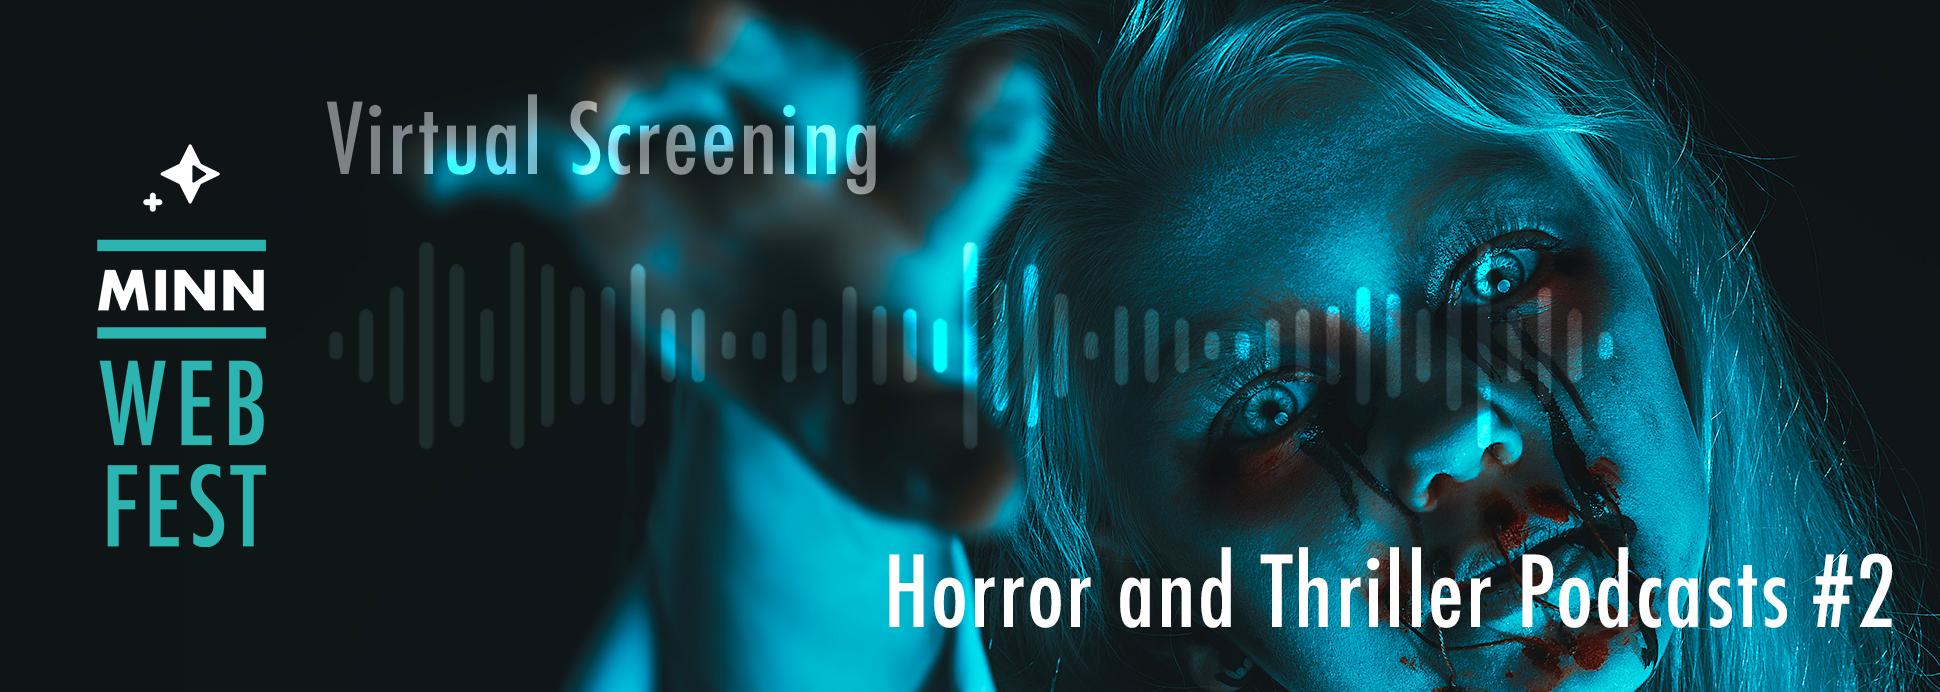 Horror and Thriller Podcasts #2